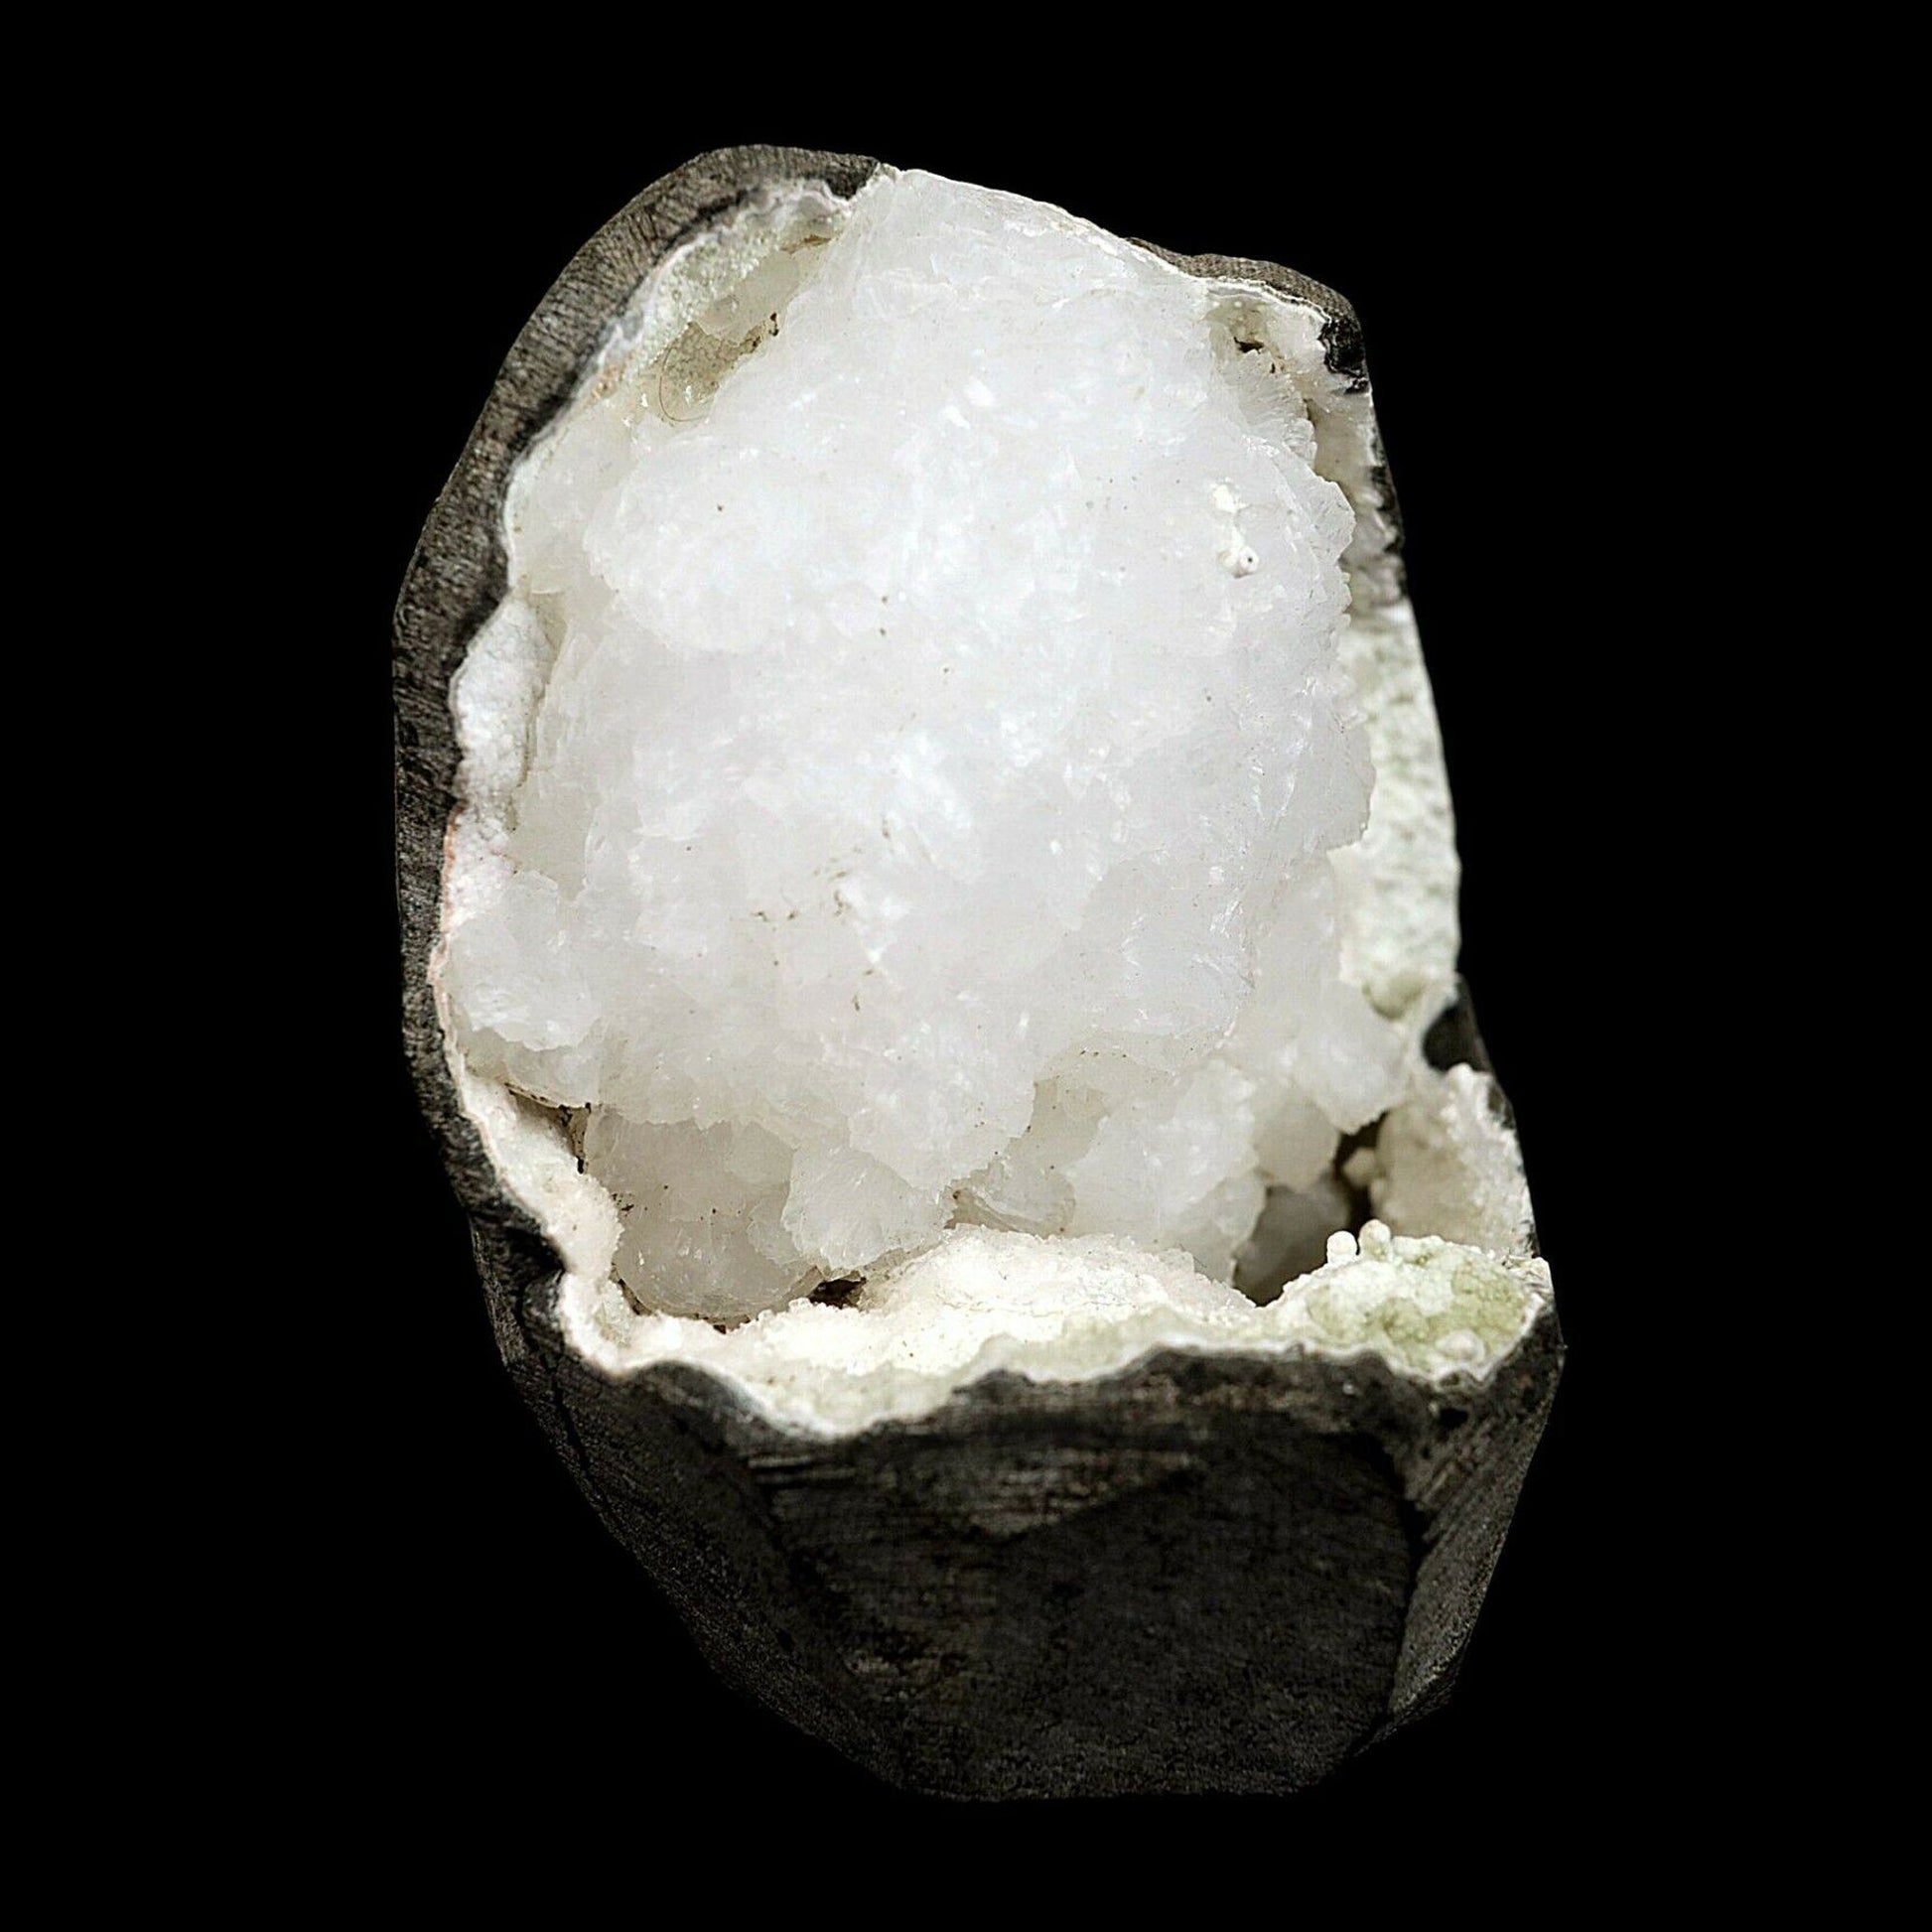 Goosecreekite Rare Mineral on Chalcedony Natural Mineral Specimen # B3569 https://www.superbminerals.us/products/goosecreekite-rare-mineral-on-chalcedony-natural-mineral-specimen-b-3569 This is a wonderful example of goosecreekite, including enormous for-the-species, profoundly shiny, wedge-molded gems which are gemmy and clear/white on a differentiating dark foundation. The goosecreekite sits inside a securing pocket in basalt. Goosecreekite is one of the most extraordinary Indian zeolites